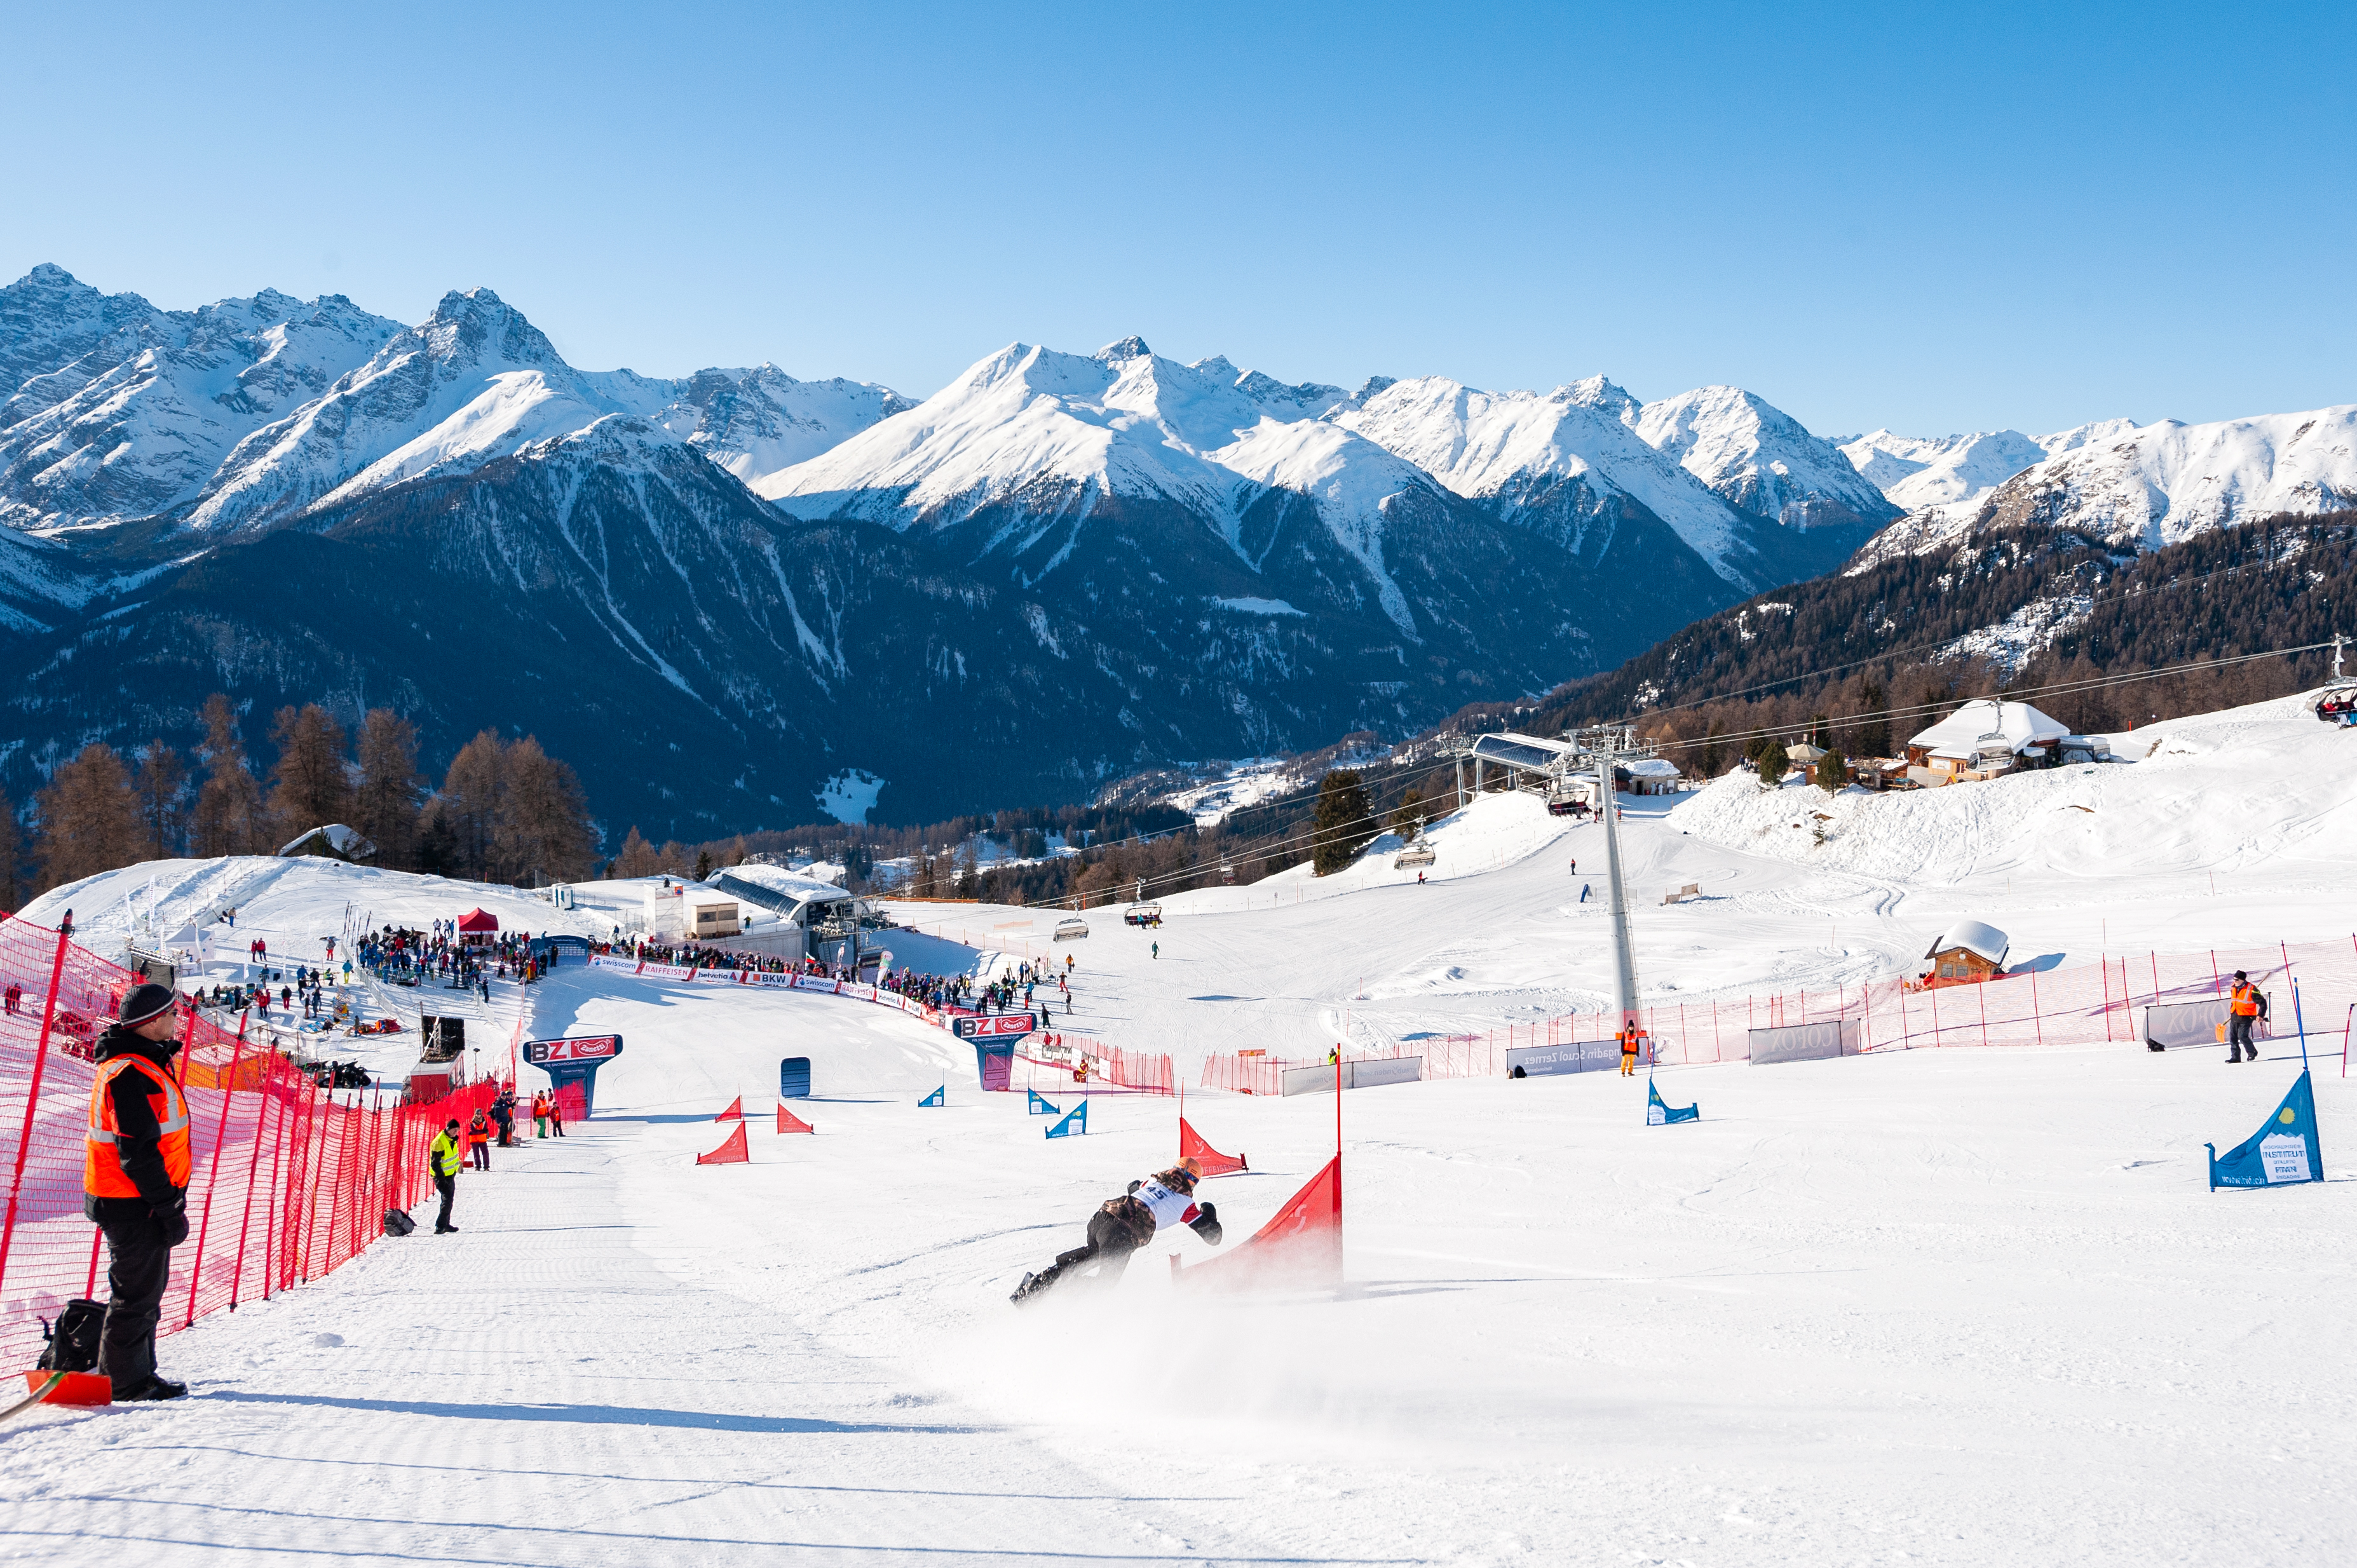 FIS Snowboard World Cup - Scuol SUI - PGS - Overview © Miha Matavz/FIS